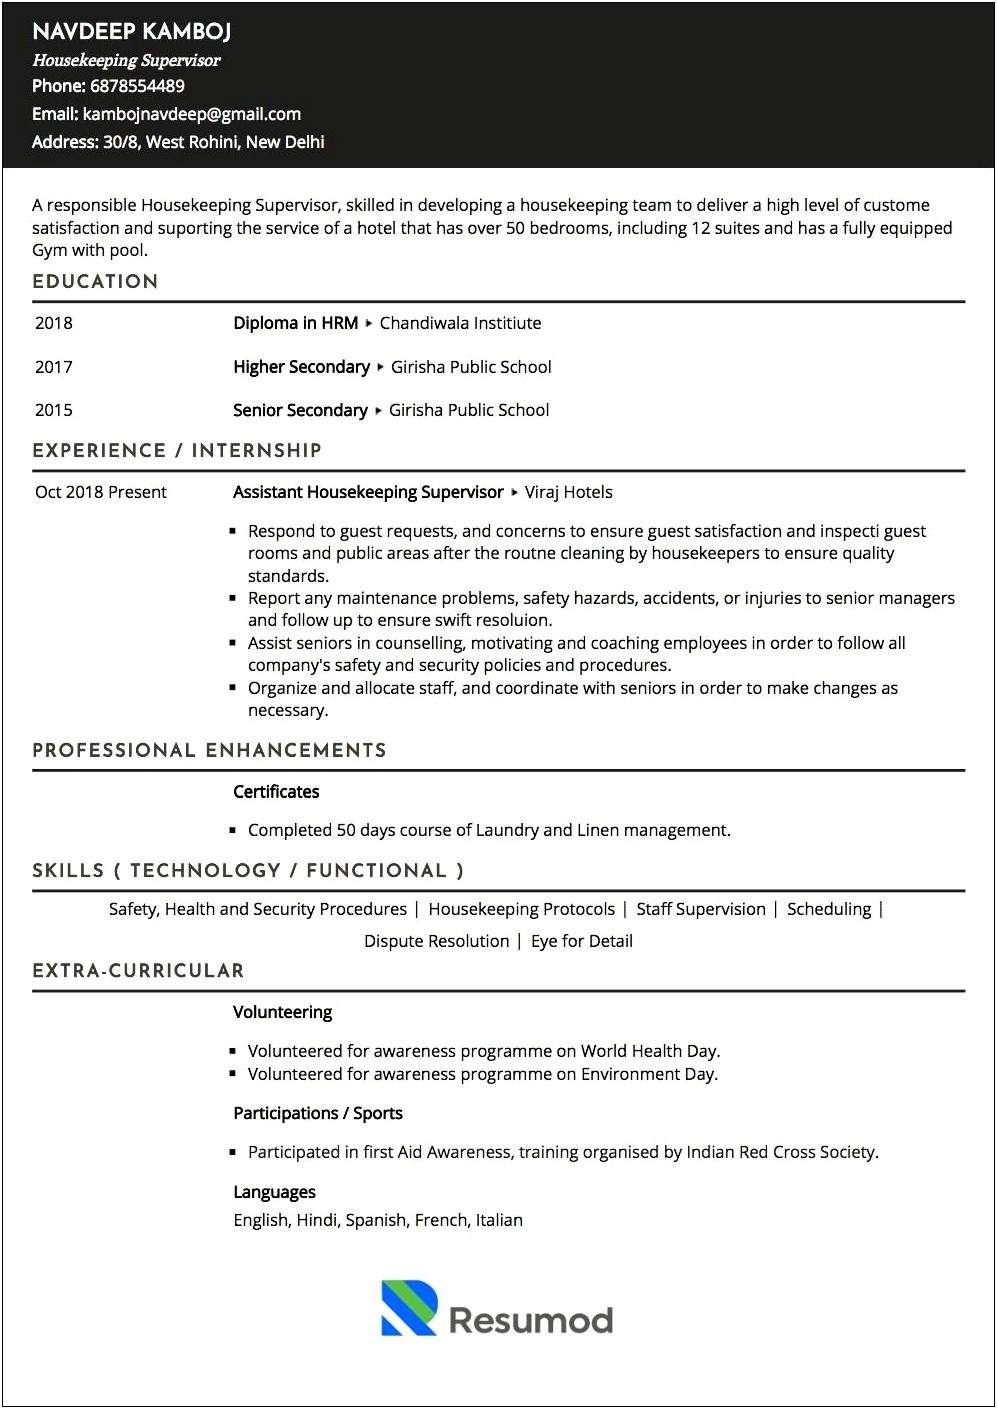 Resume Summary For Housekeeping Manager